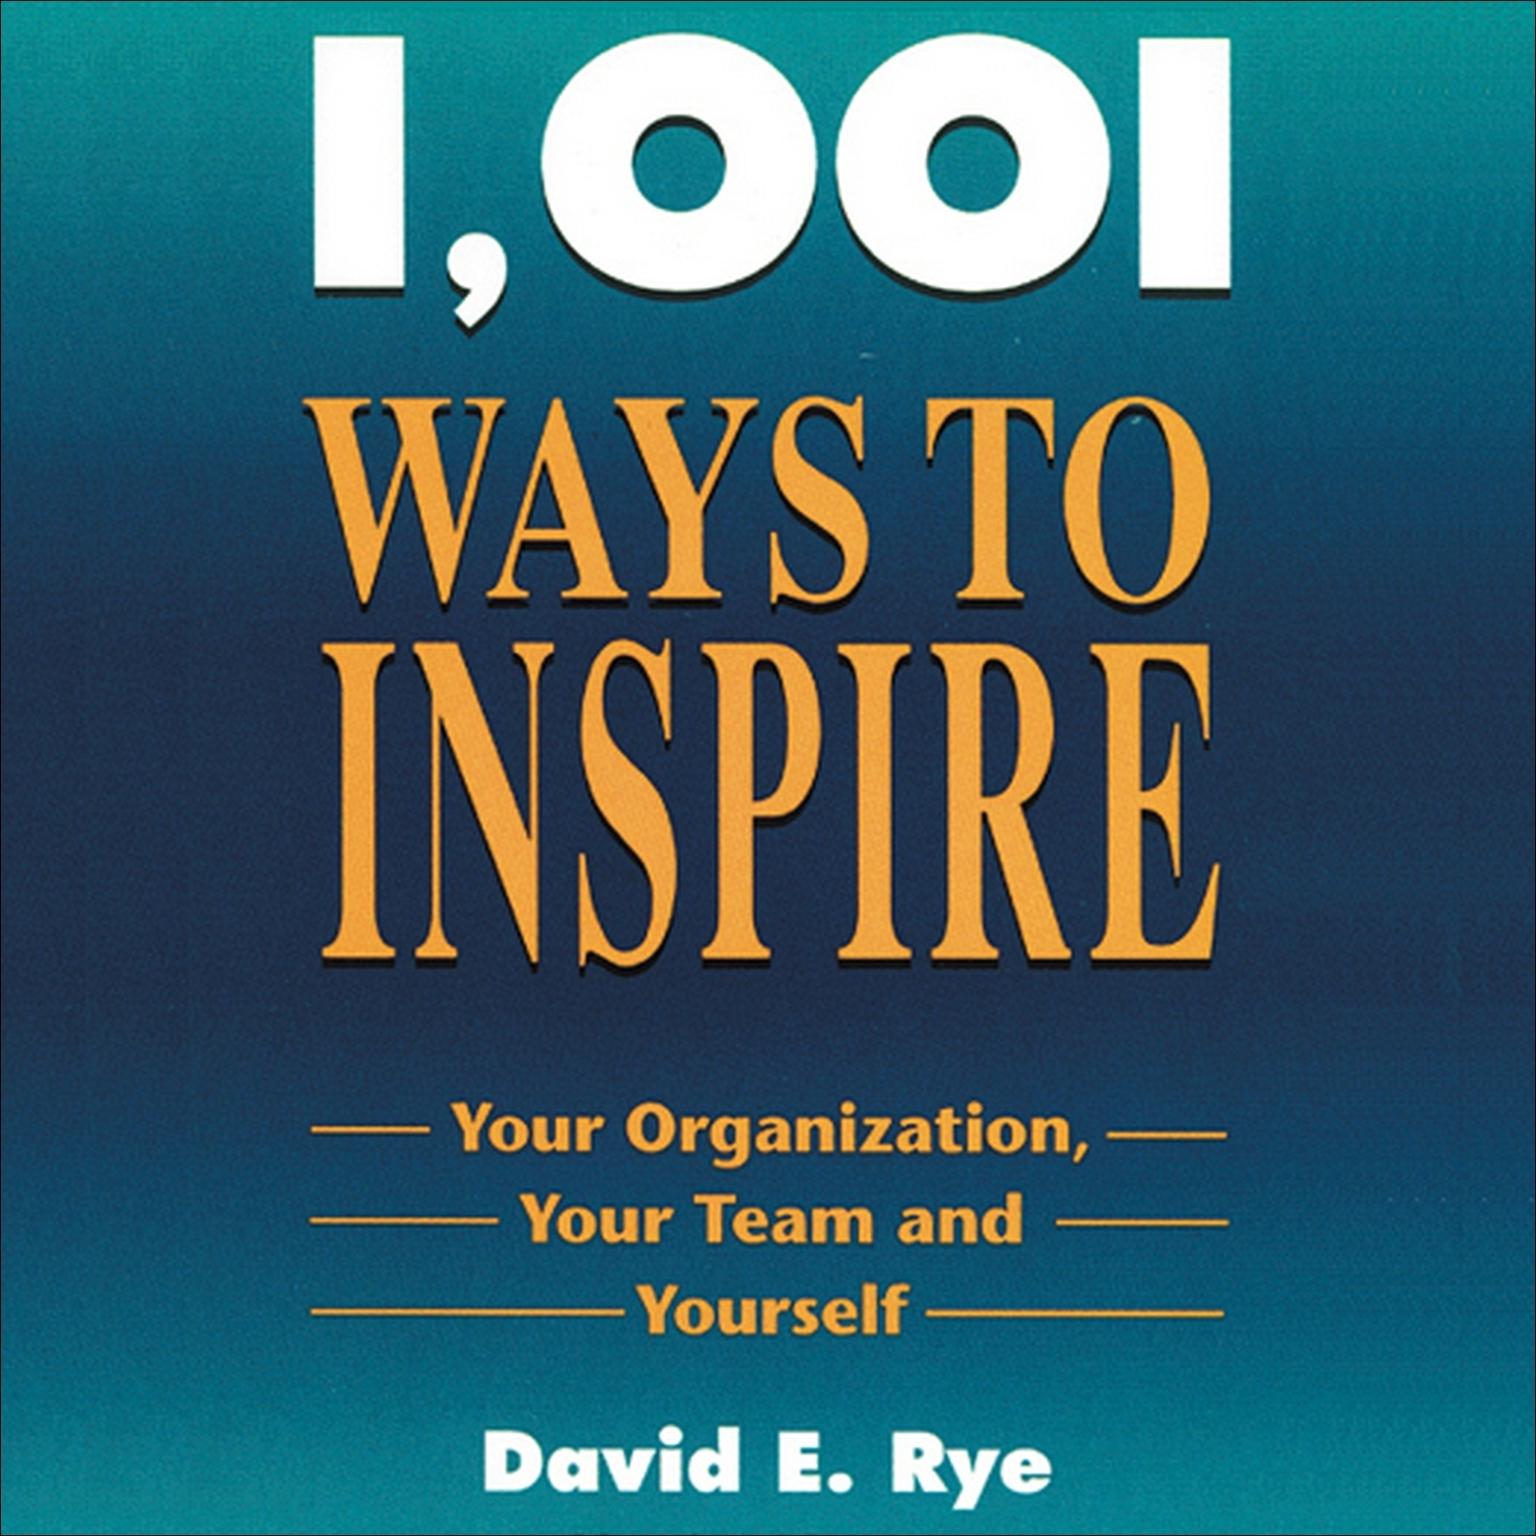 1001 Ways to Inspire (Abridged): Your Organization, Your Team and Yourself Audiobook, by David E. Rye